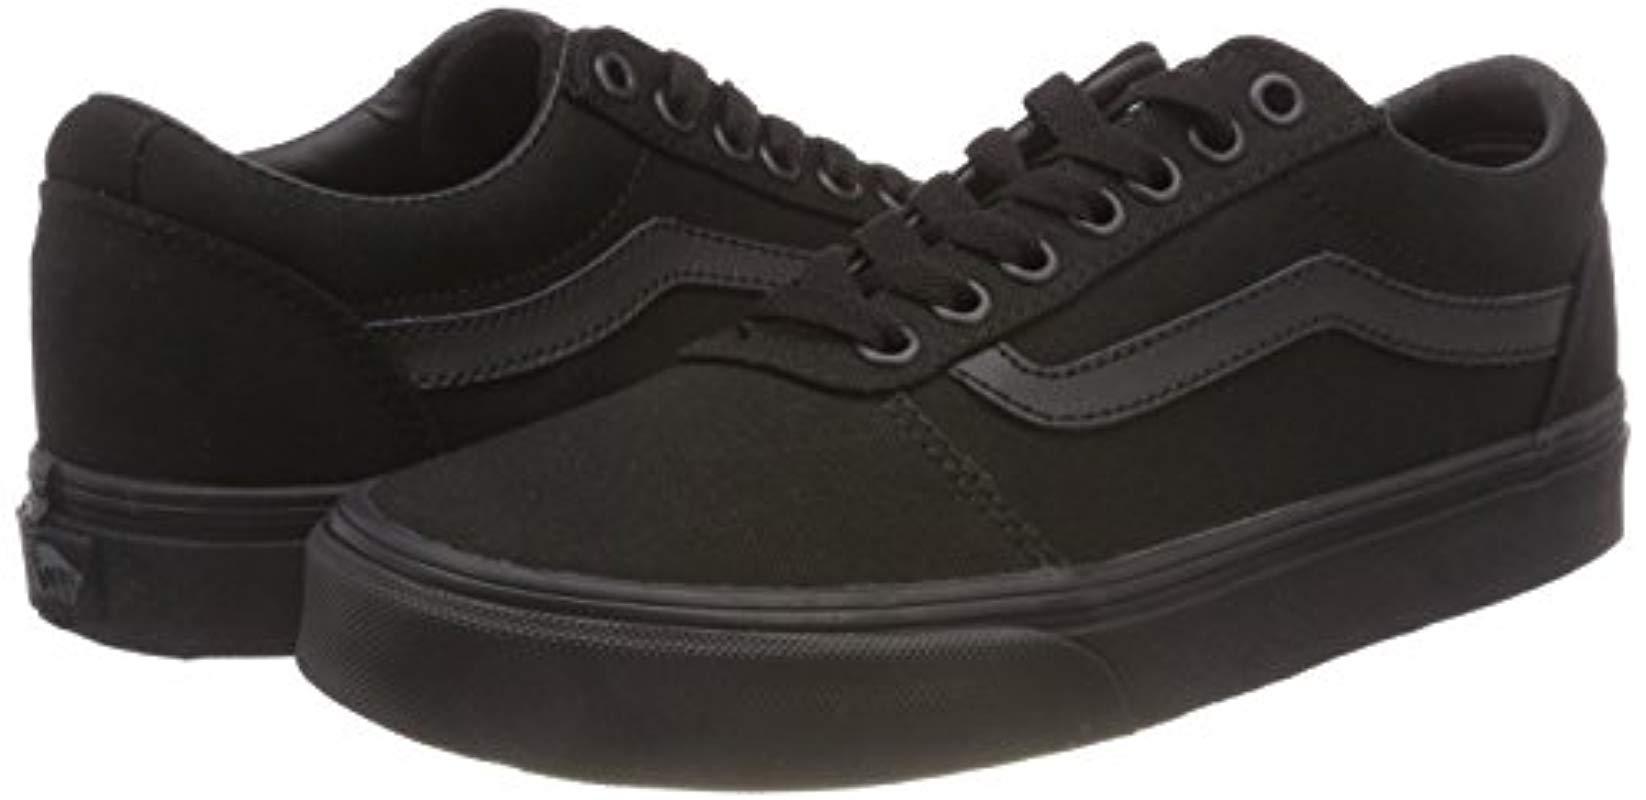 Vans Canvas Ward Trainers in Black for Men - Save 47% - Lyst